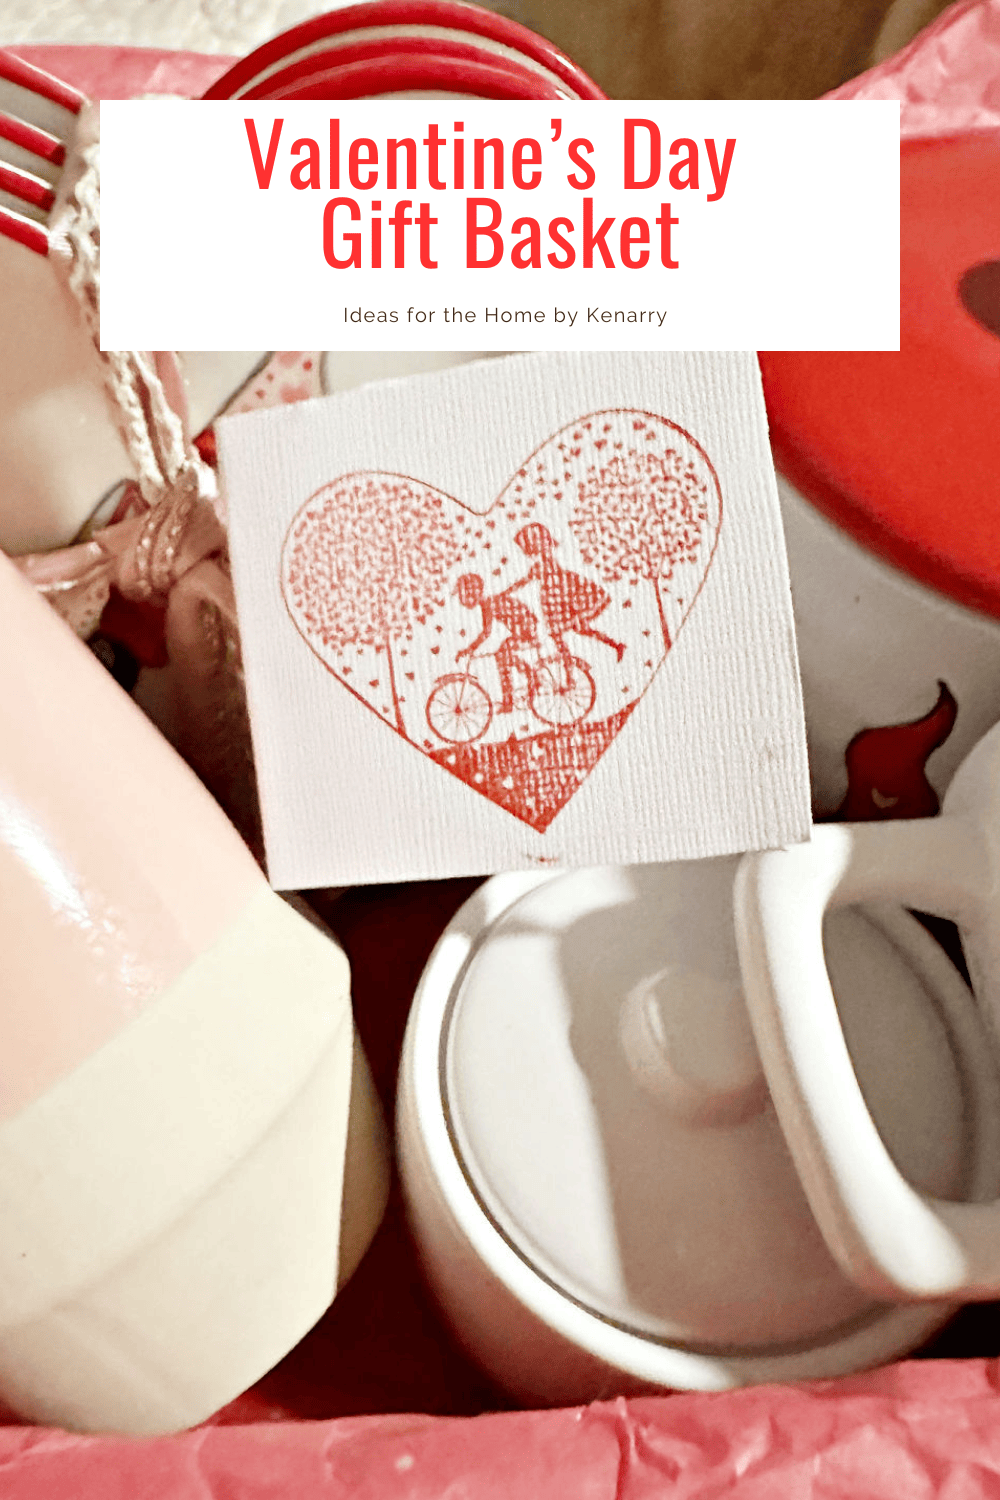 pin image with Valentine's Day gift basket